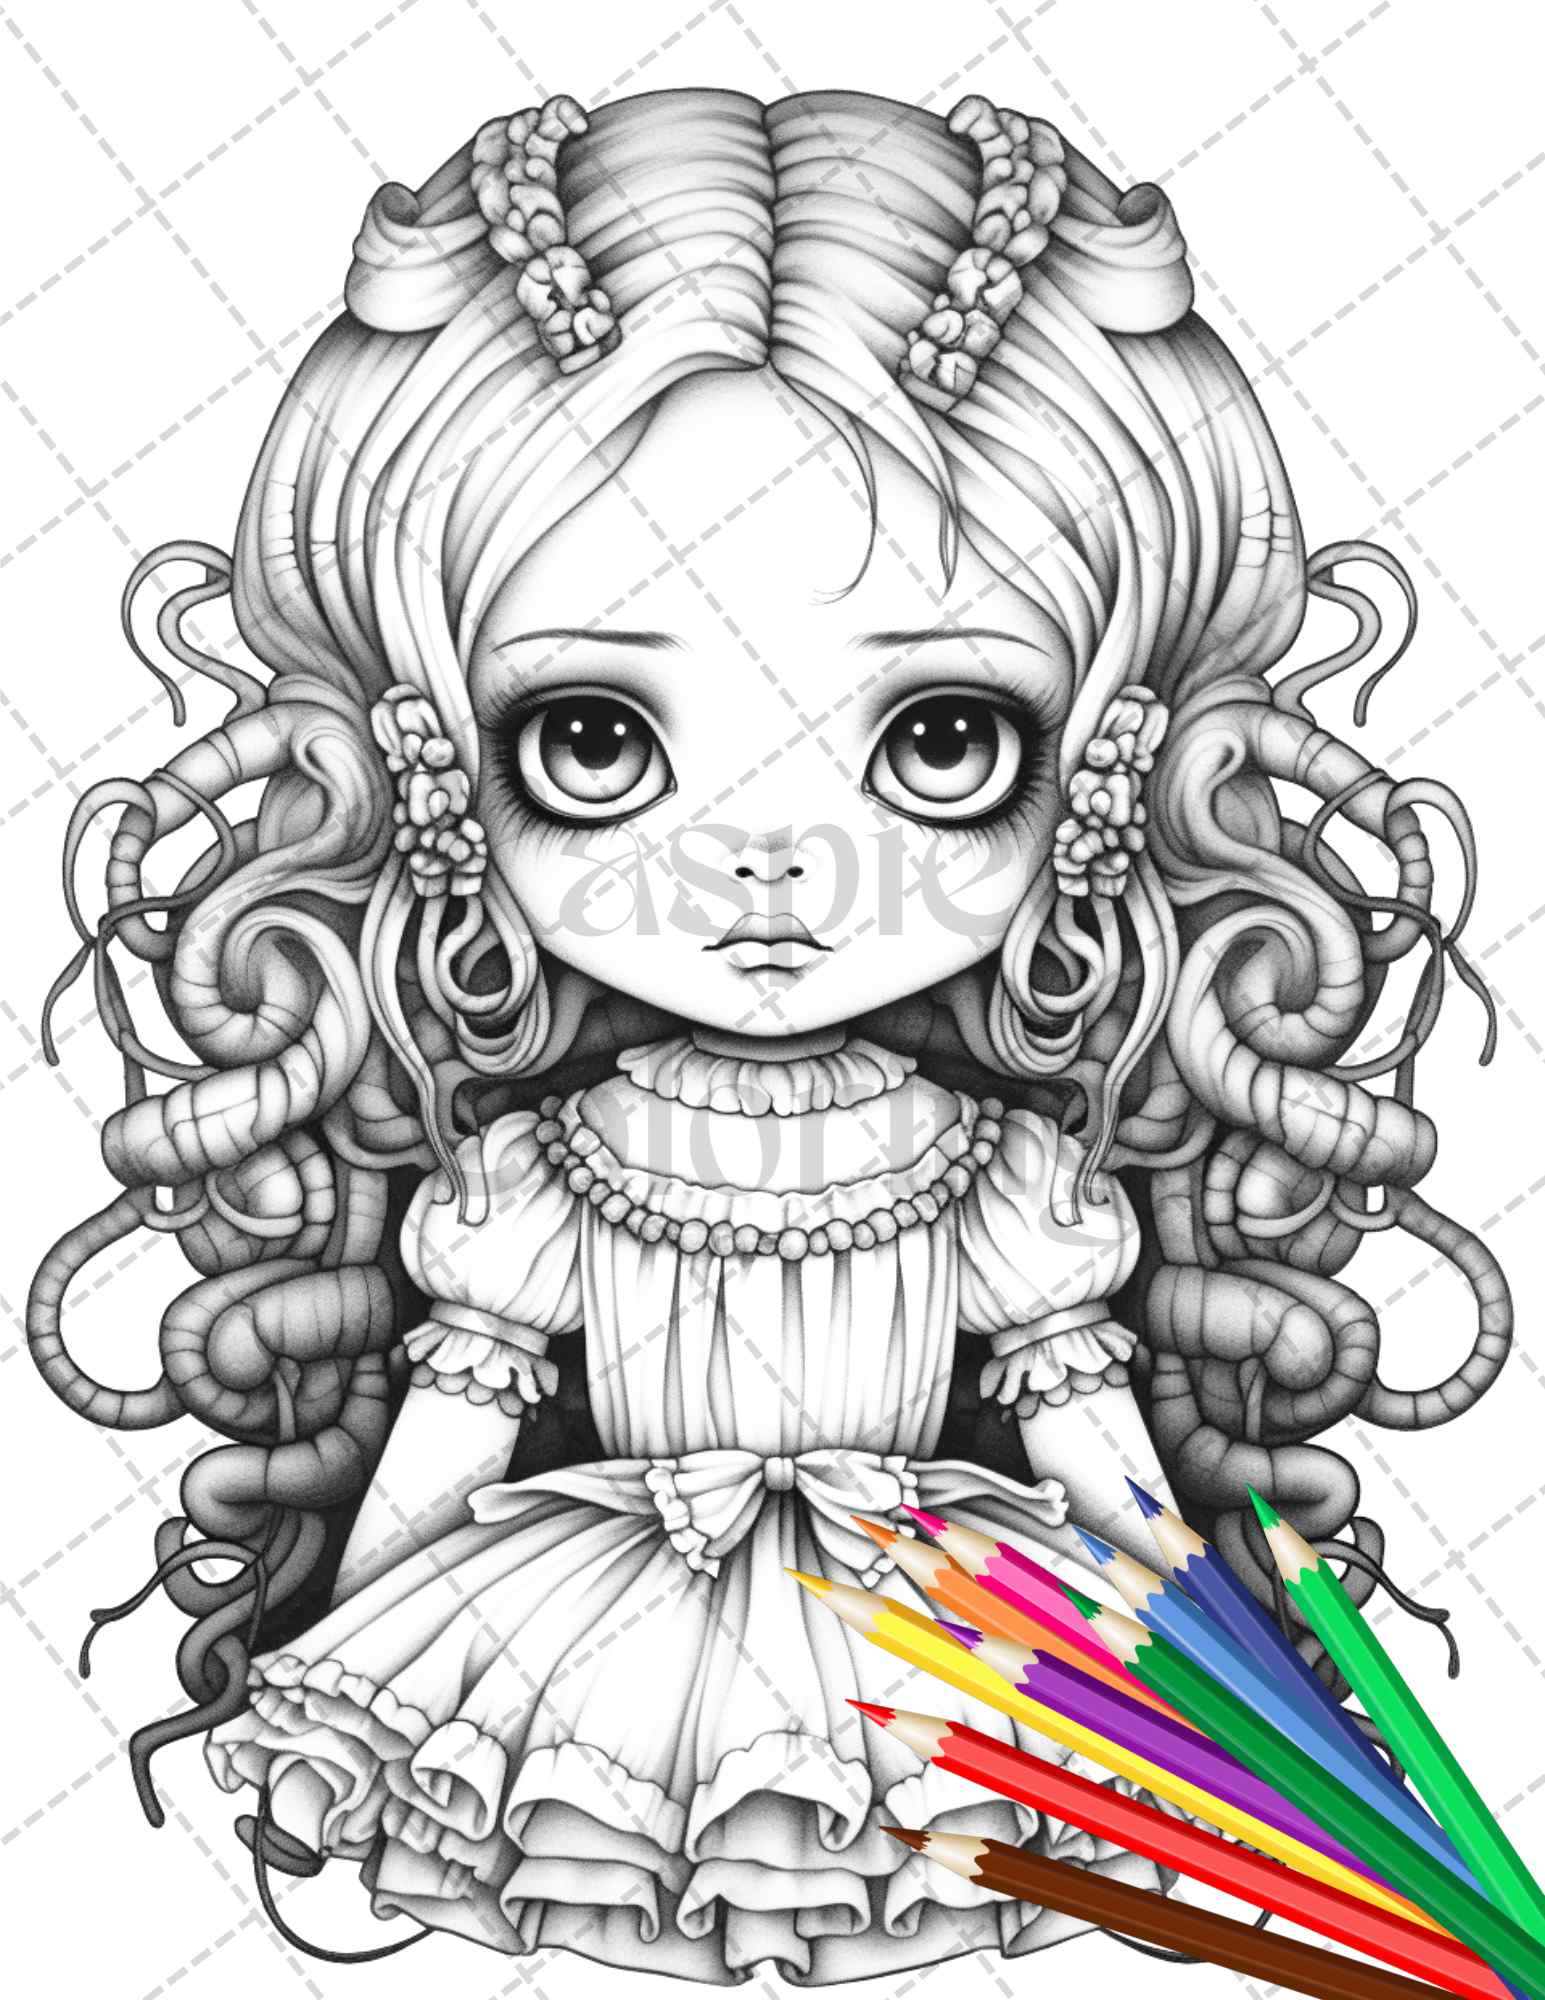 creepy porcelain doll coloring page, grayscale coloring sheet for adults, halloween coloring page for adults